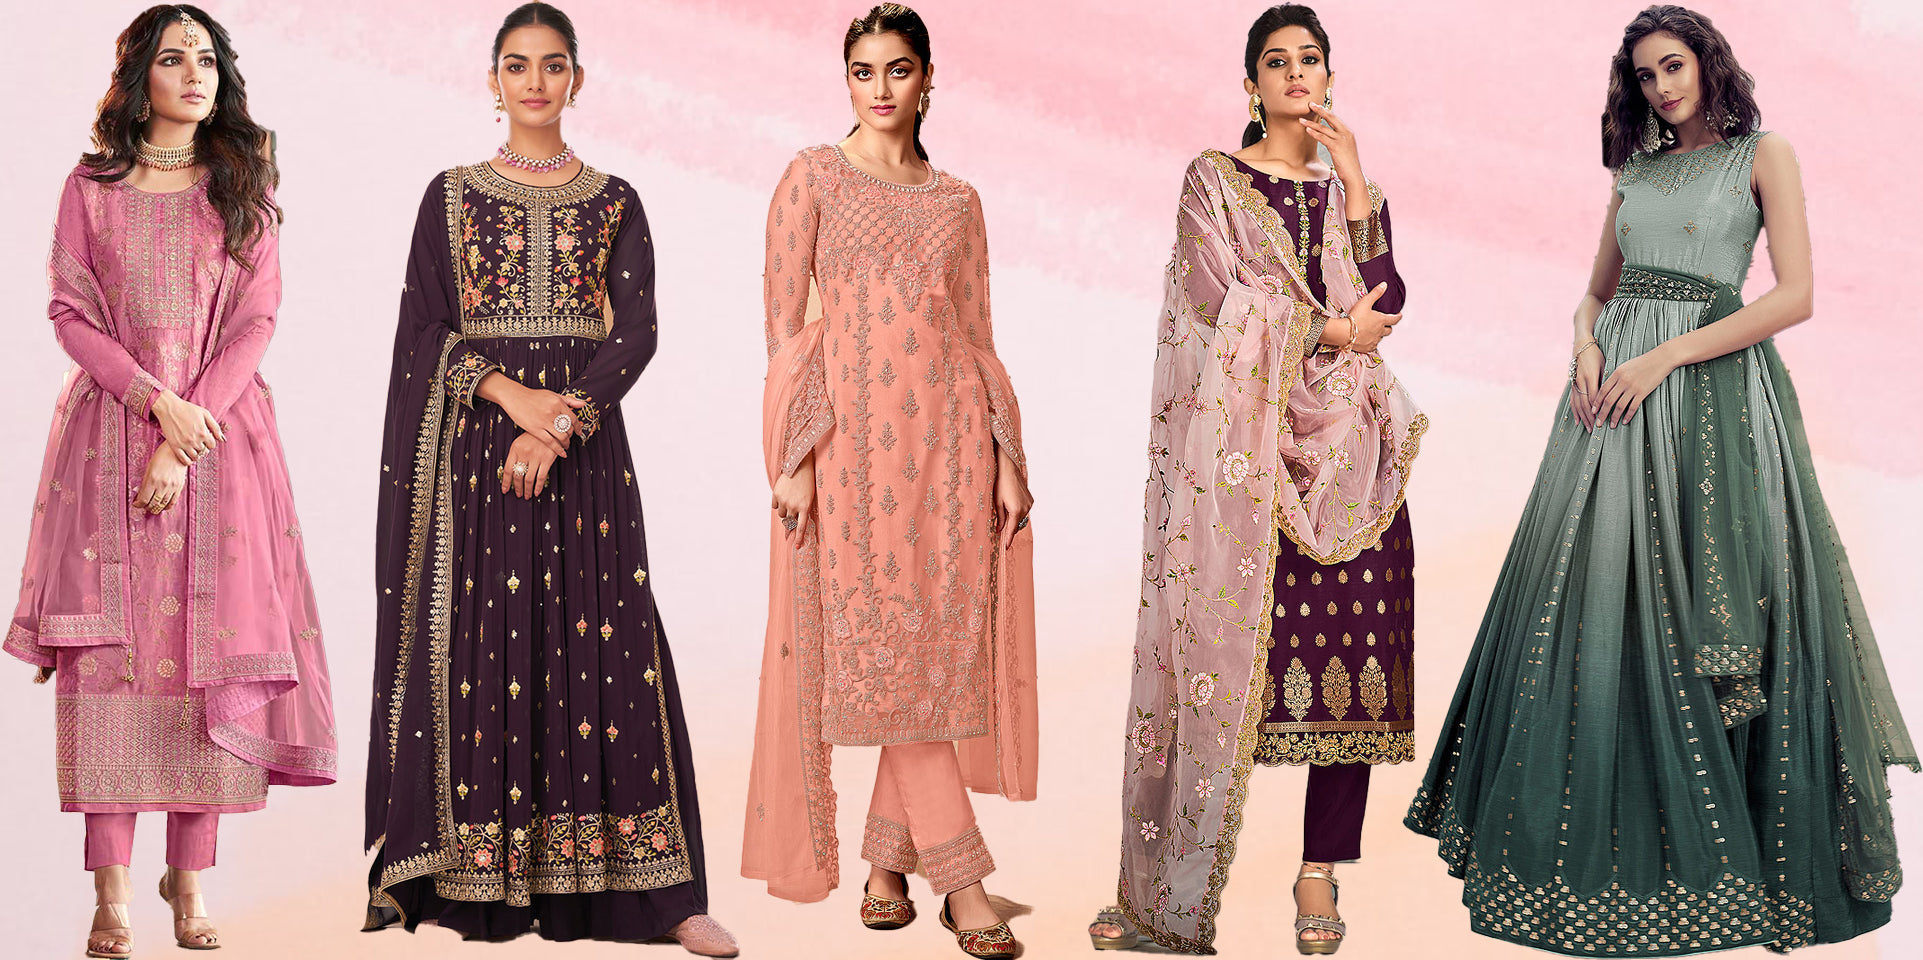 How To Look Stylish In Traditional Indian Clothing Where To Buy The Best Fashionable Ethnic Wear For Women Online ?v=1671543652